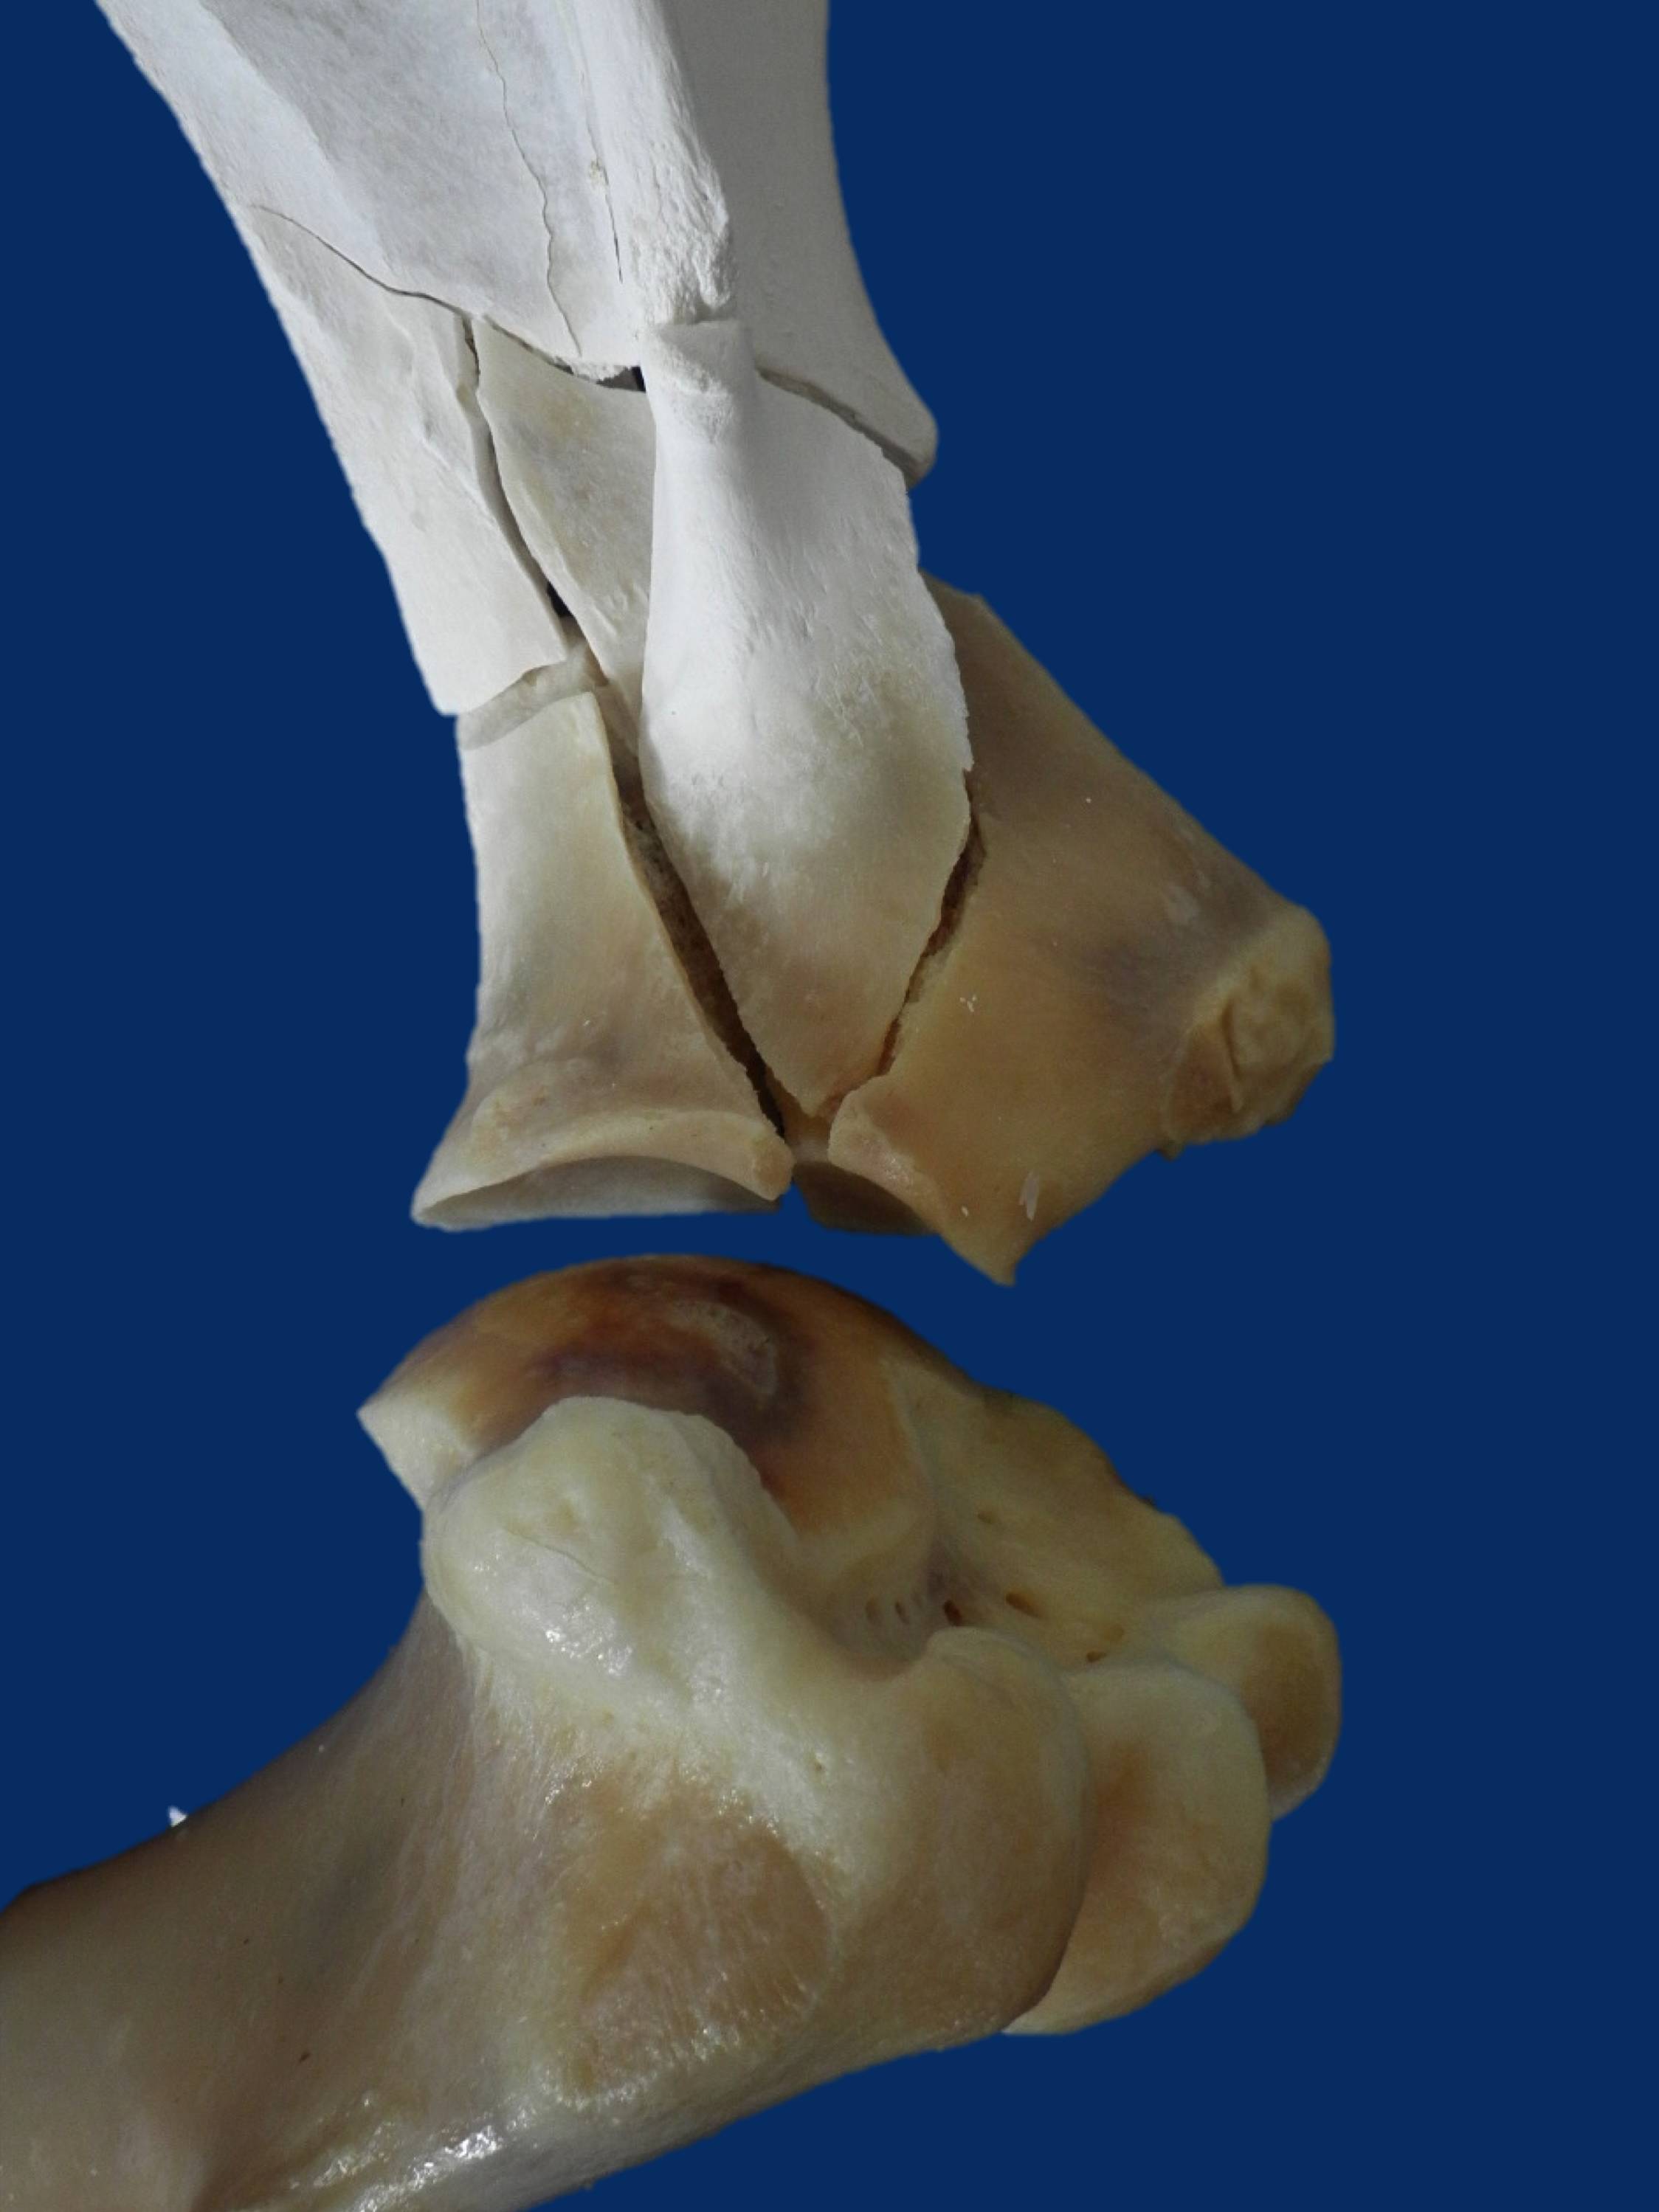  A close up shows how the scapular fracture extends into the shoulder joint. 